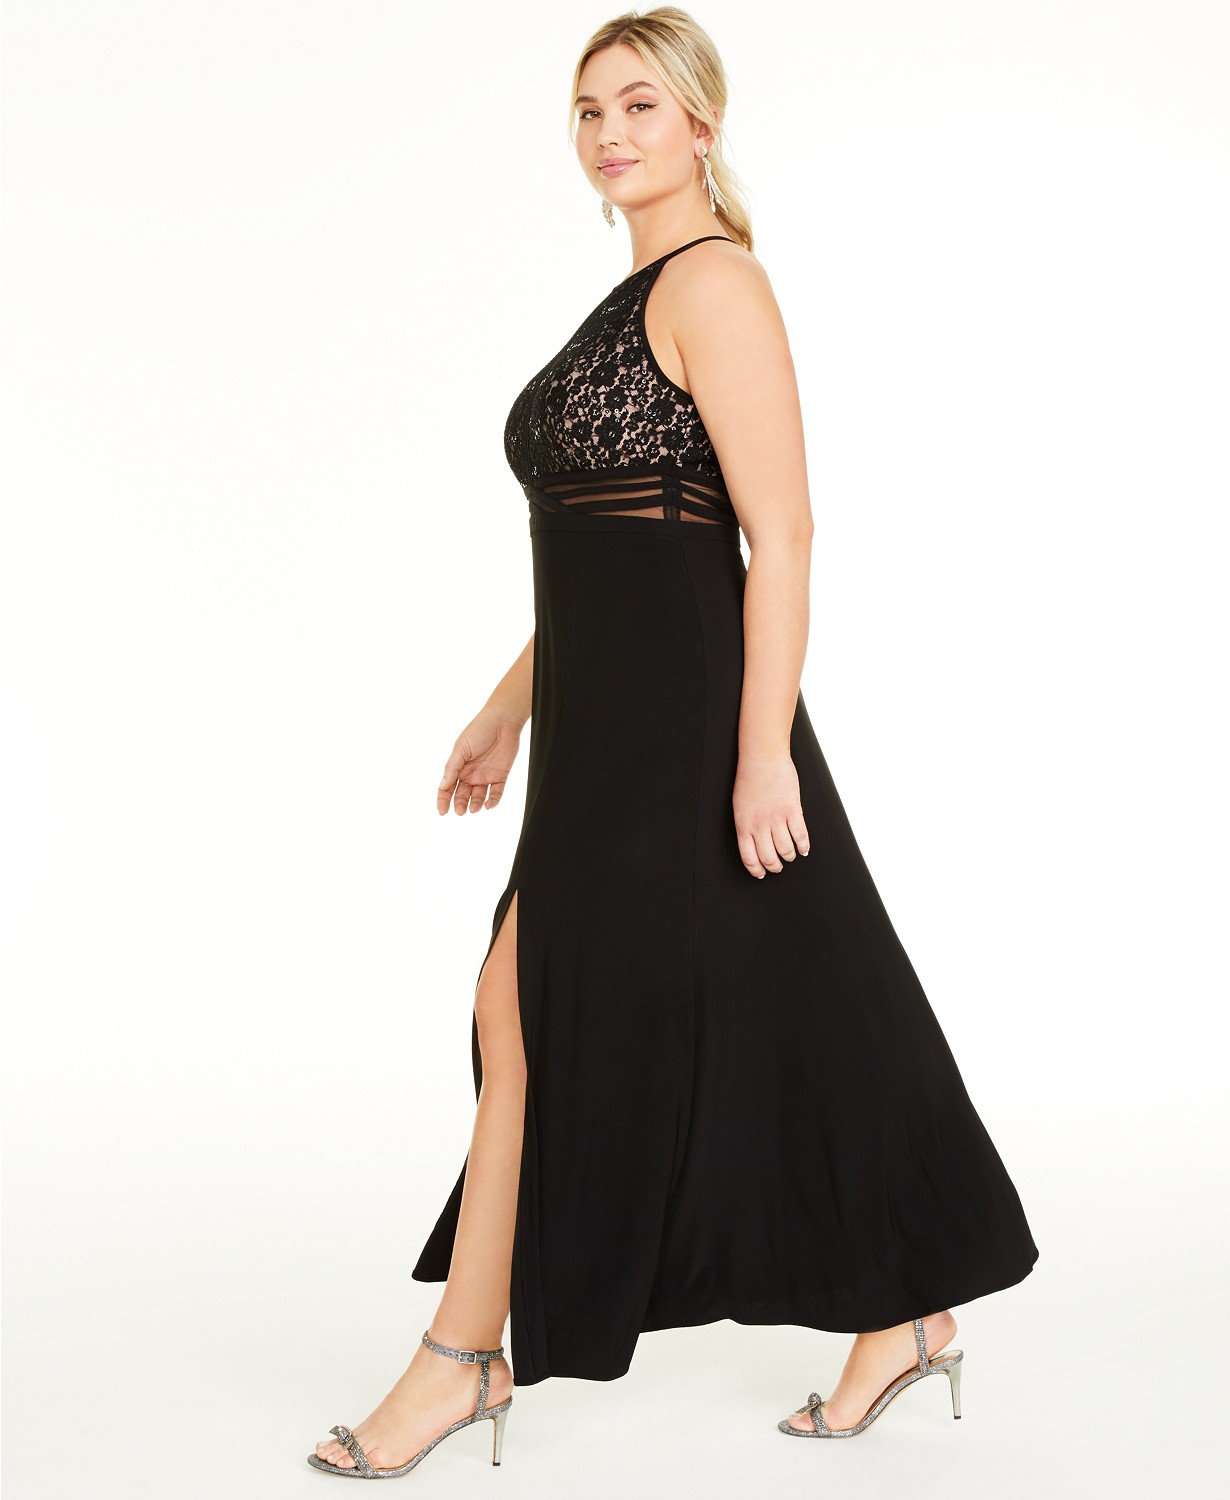 Macy's Trendy size open back gown black color side-view